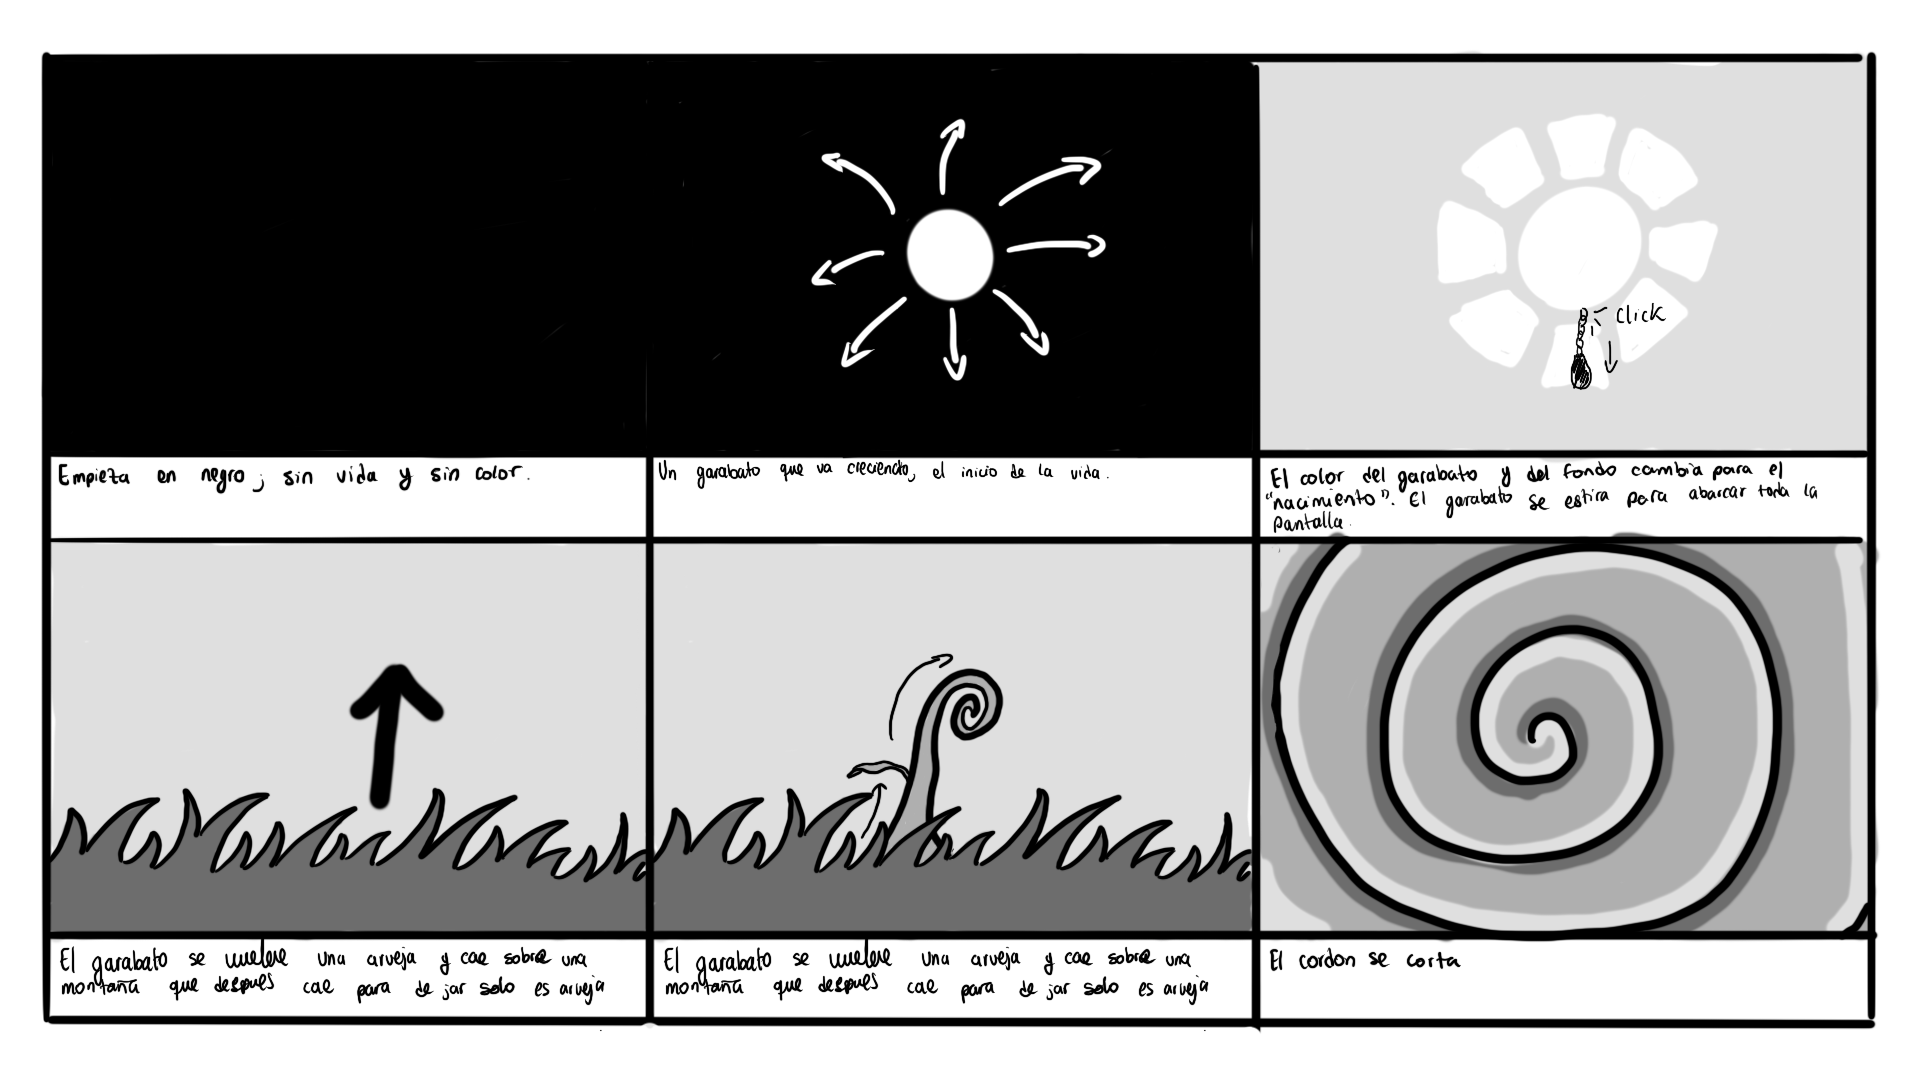 A storyboard in black and white for the animation